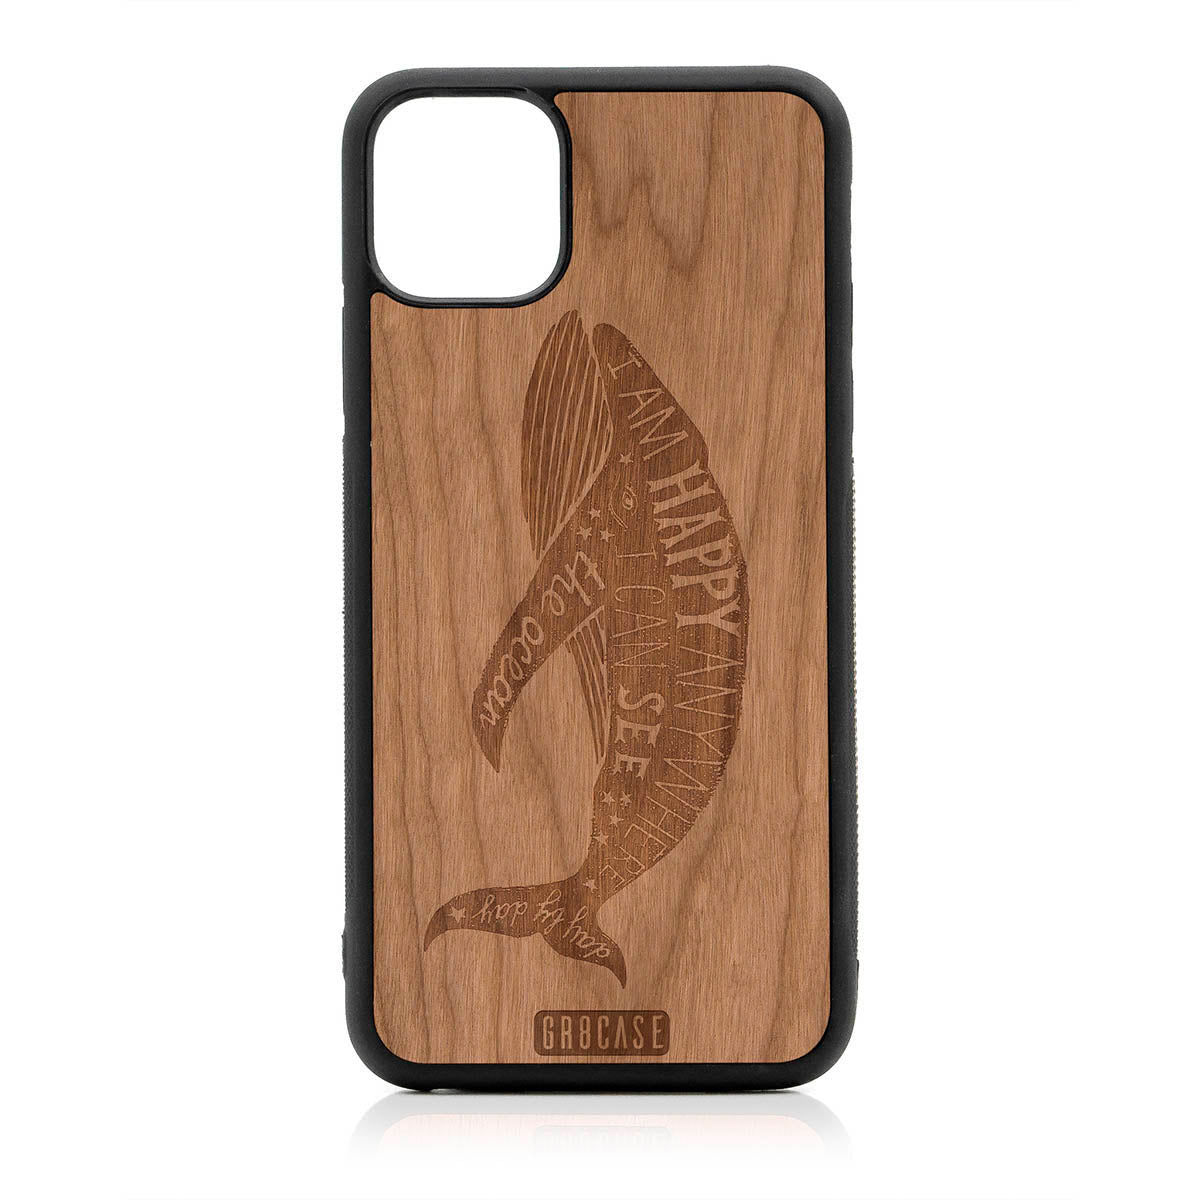 I'm Happy Anywhere I Can See The Ocean (Whale) Design Wood Case For iPhone 11 Pro Max